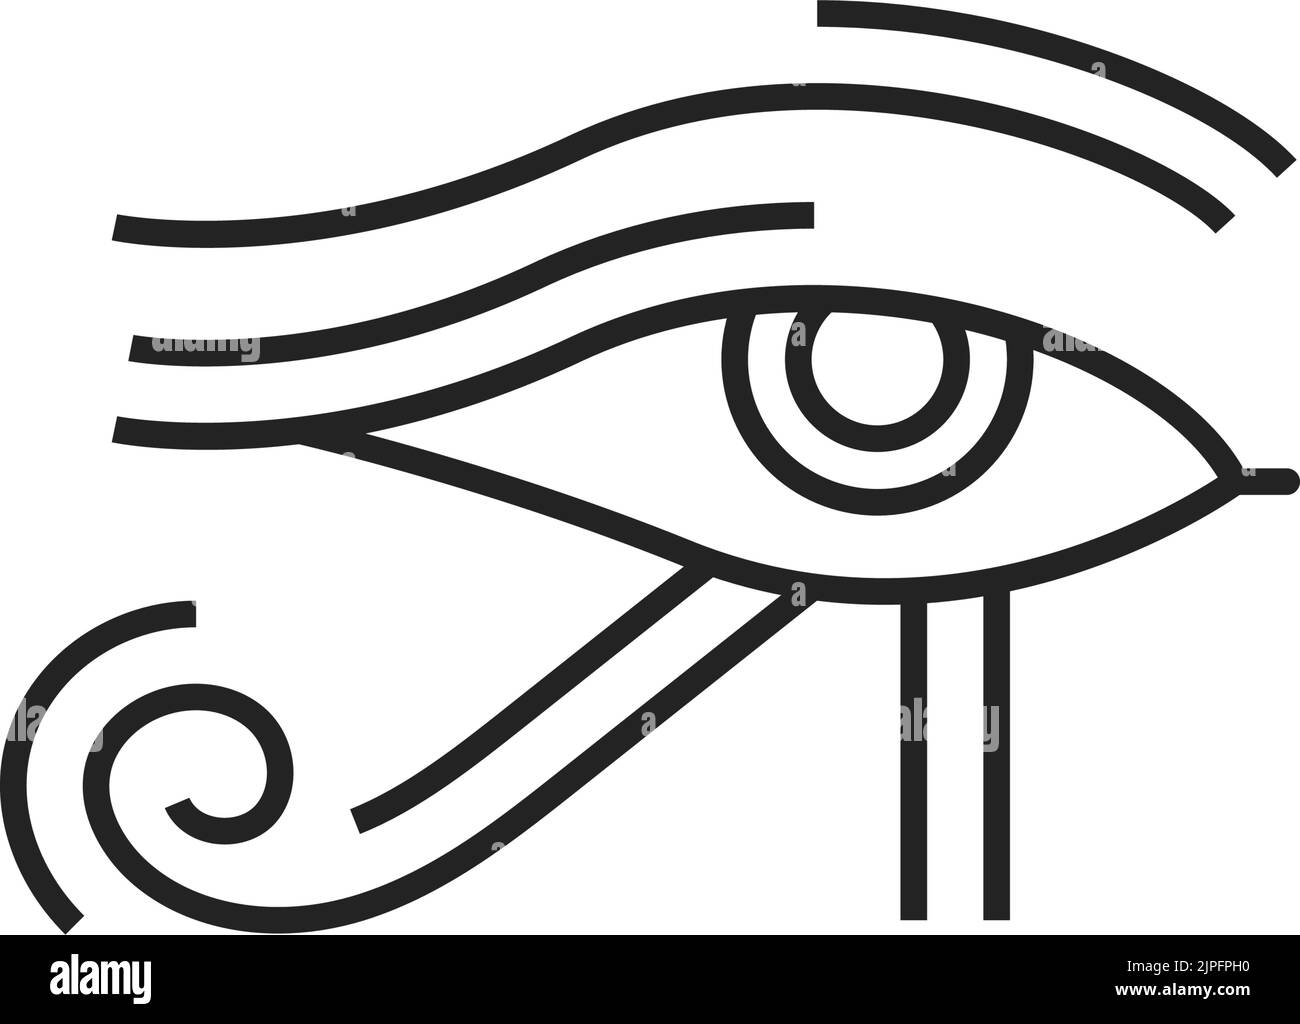 Eye of Horus isolated outline vector icon. Wadjet, wedjat or udjat ancient Egyptian monochrome symbol of protection, royal power and good health Stock Vector